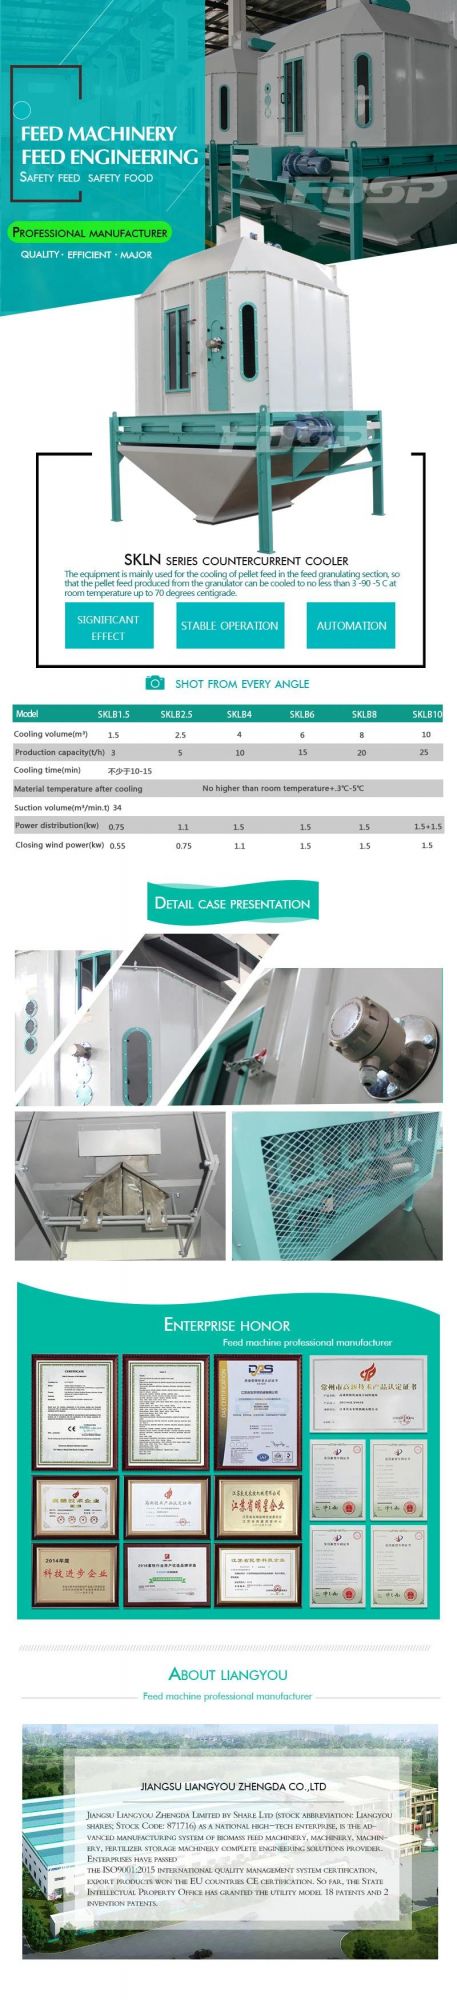 CE Approved Feed Machinery Cooler (SKLN)